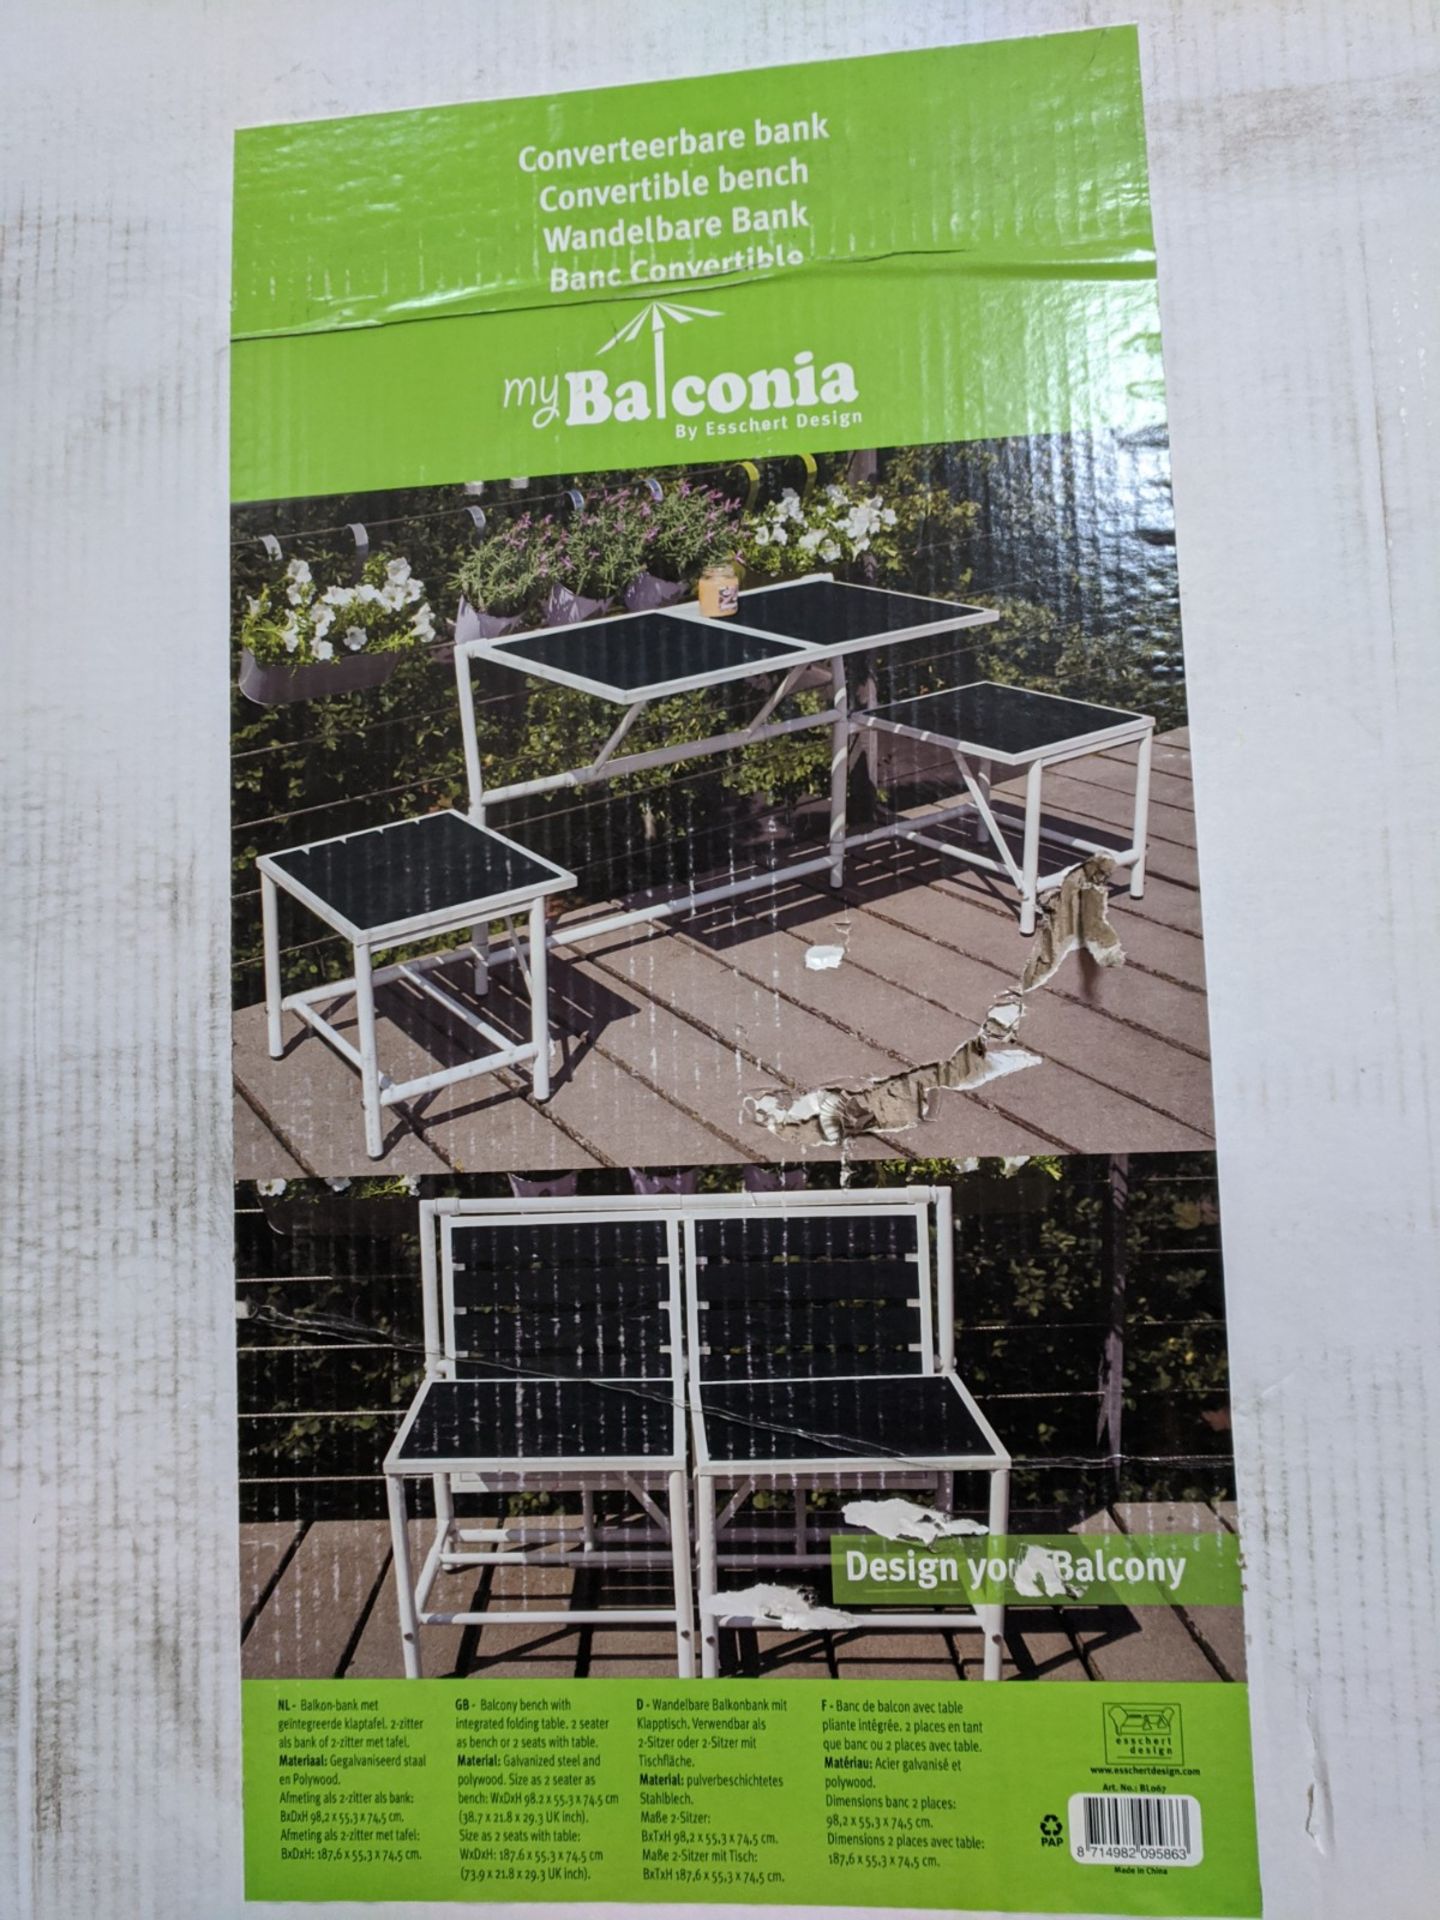 Brand new Multi Bench Set - Transforms from a bench to a picnic table as in picture - New sealed - Image 3 of 3